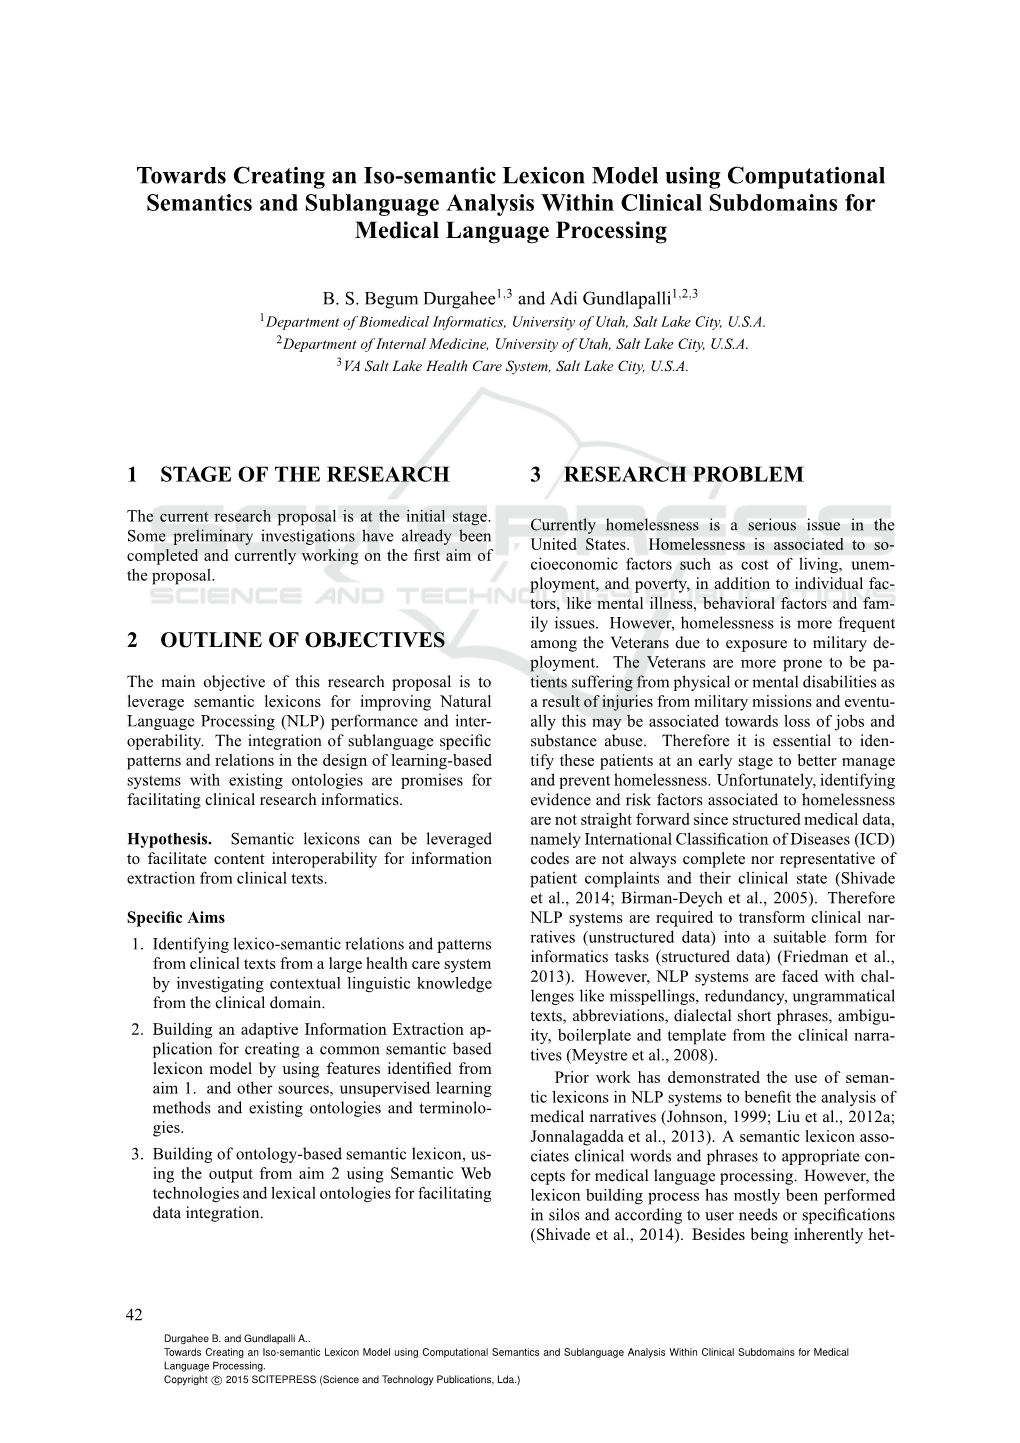 Towards Creating an Iso-Semantic Lexicon Model Using Computational Semantics and Sublanguage Analysis Within Clinical Subdomains for Medical Language Processing